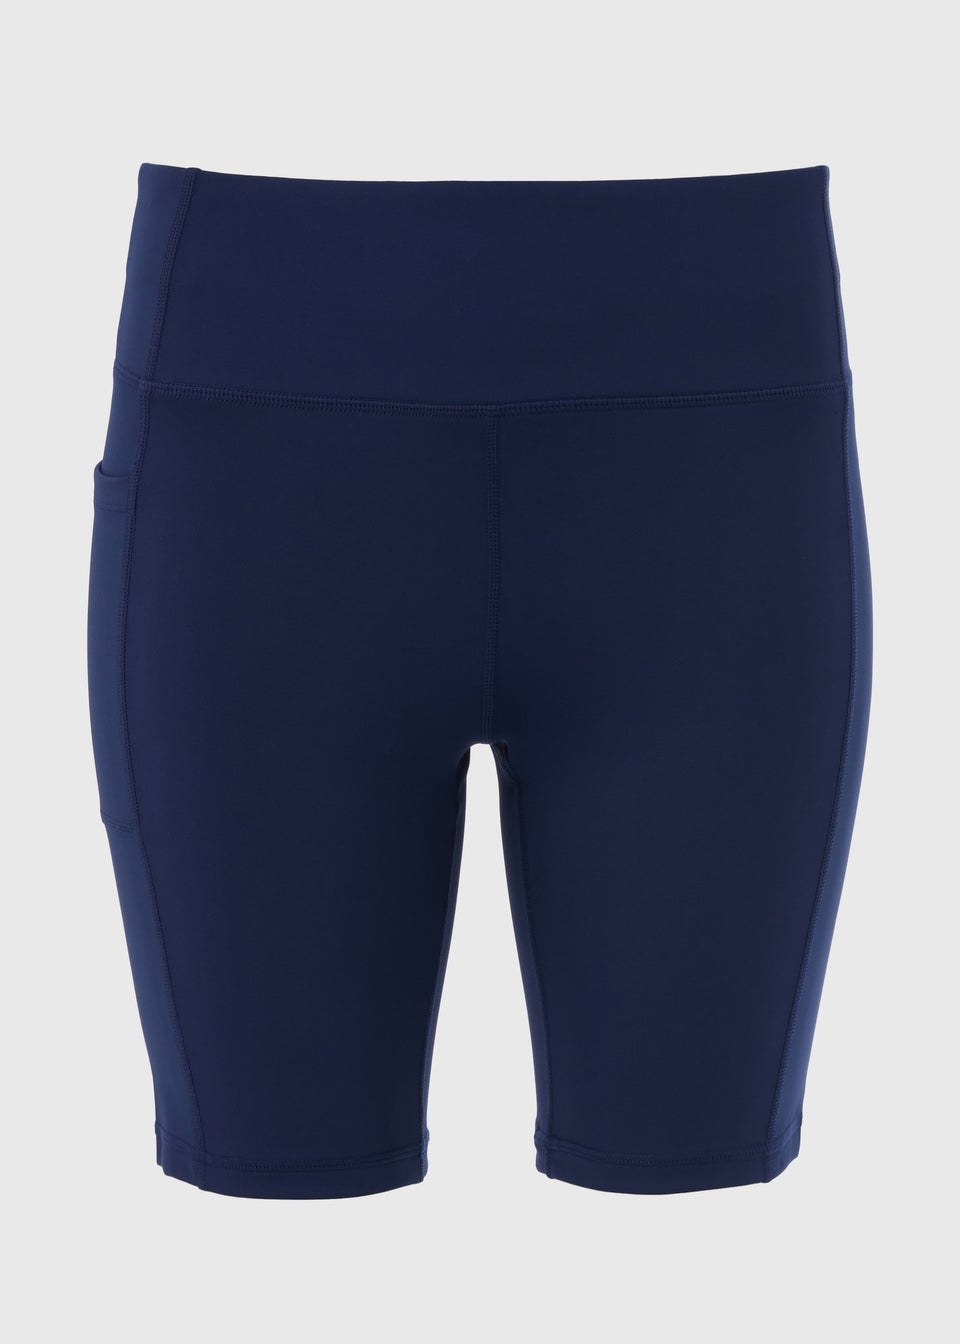 Souluxe Navy Cycling Shorts